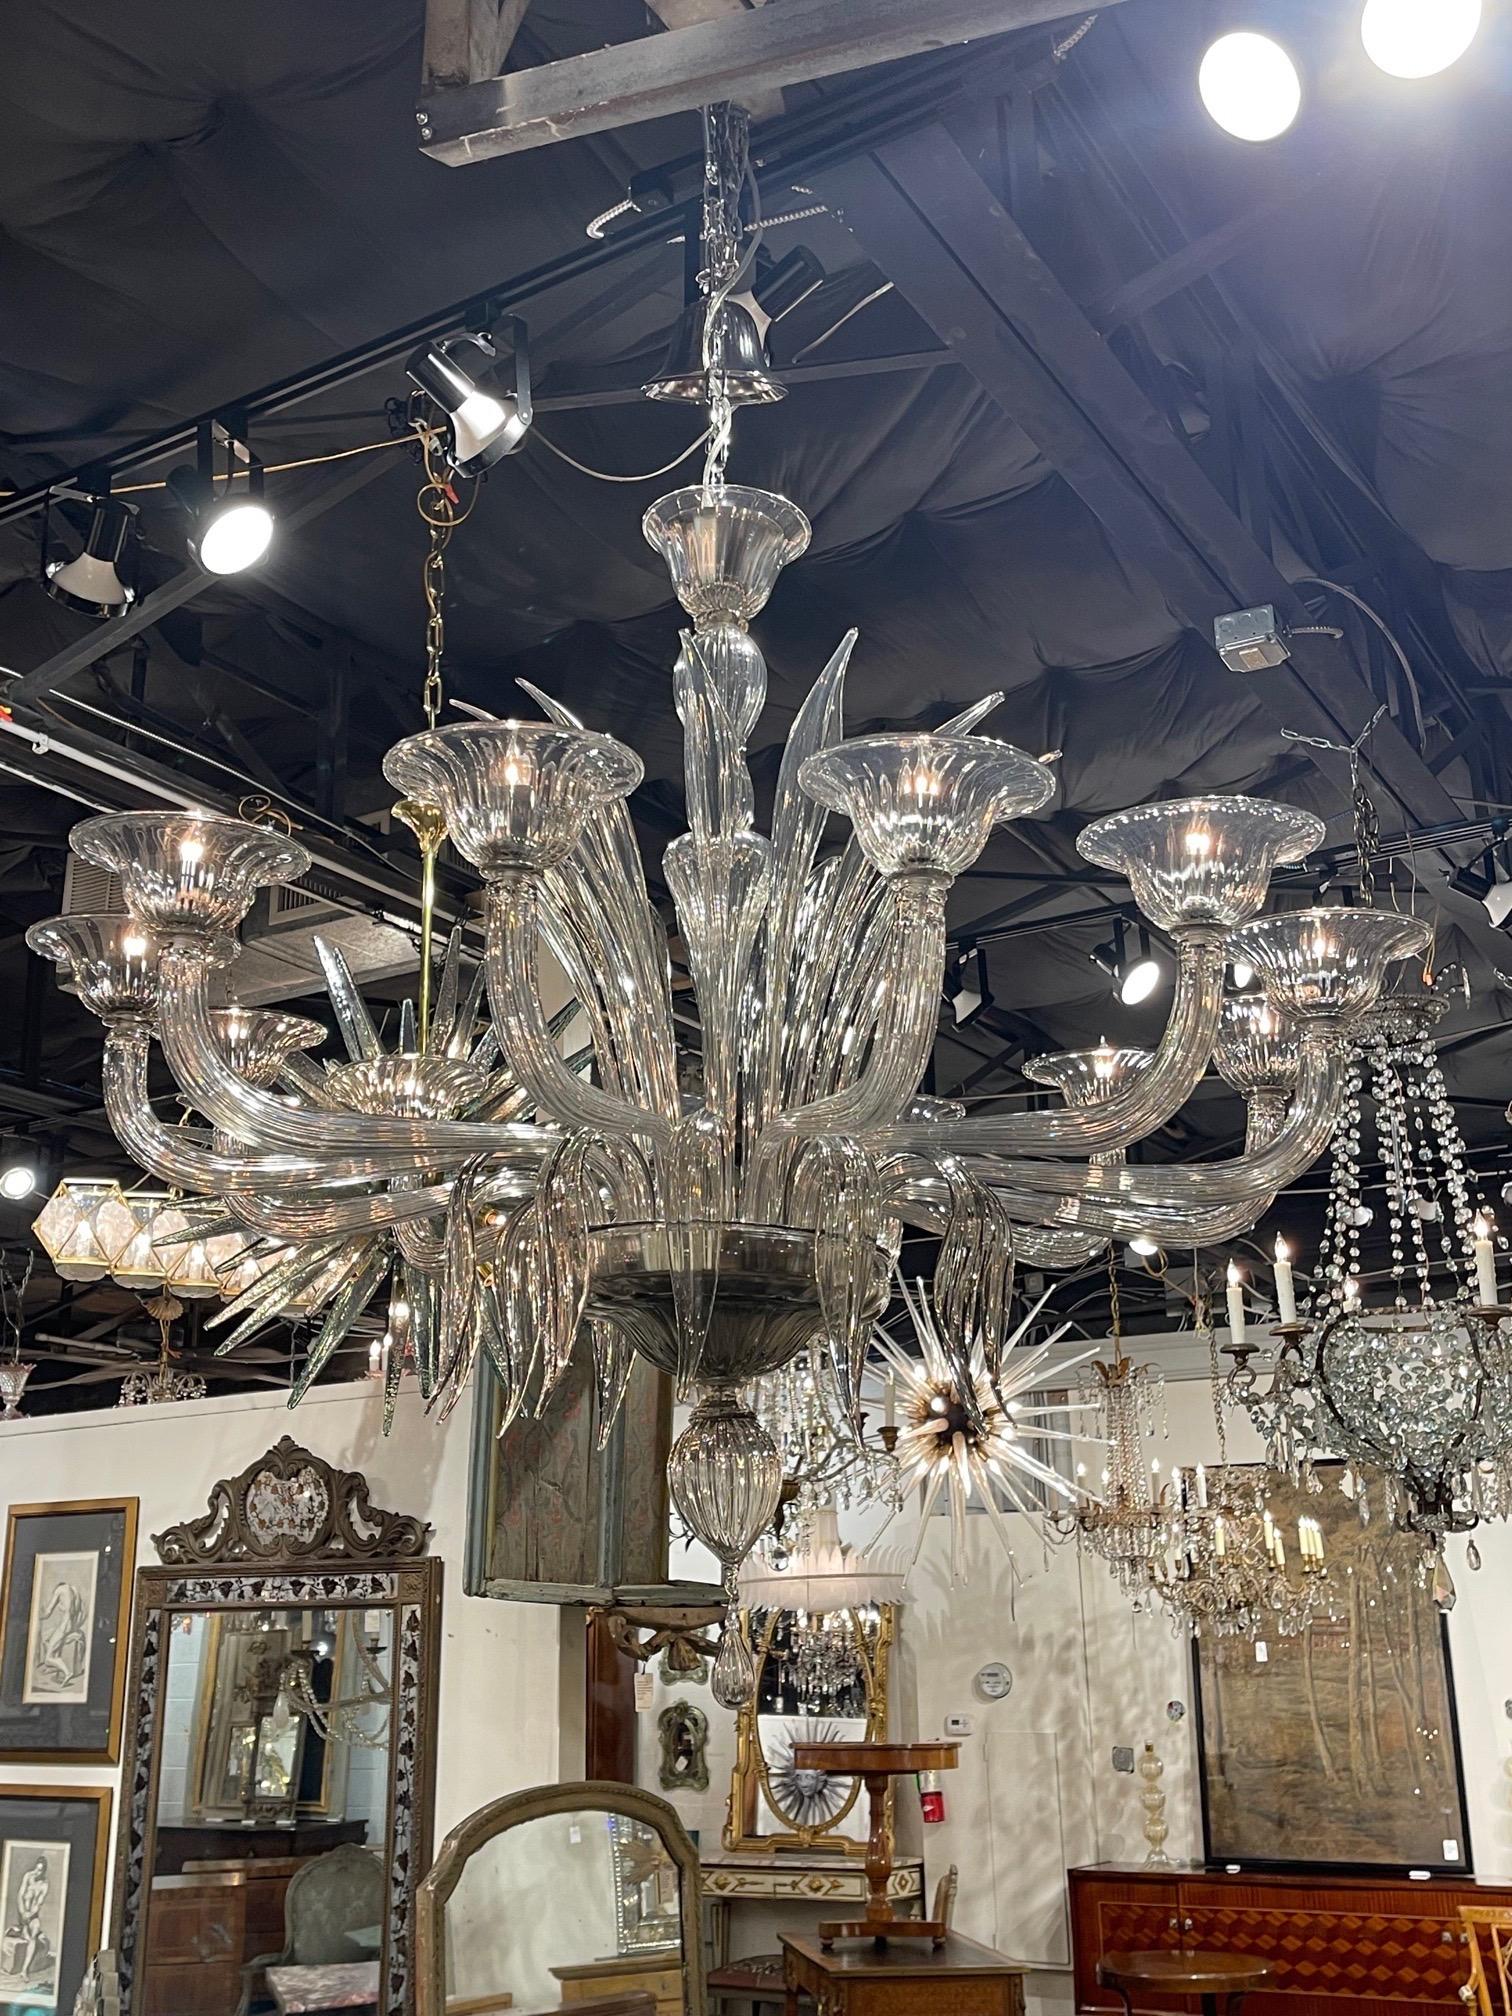 Decorative smoke colored murano glass chandelier with 12 lights. A very special fixture that creates a high end look!